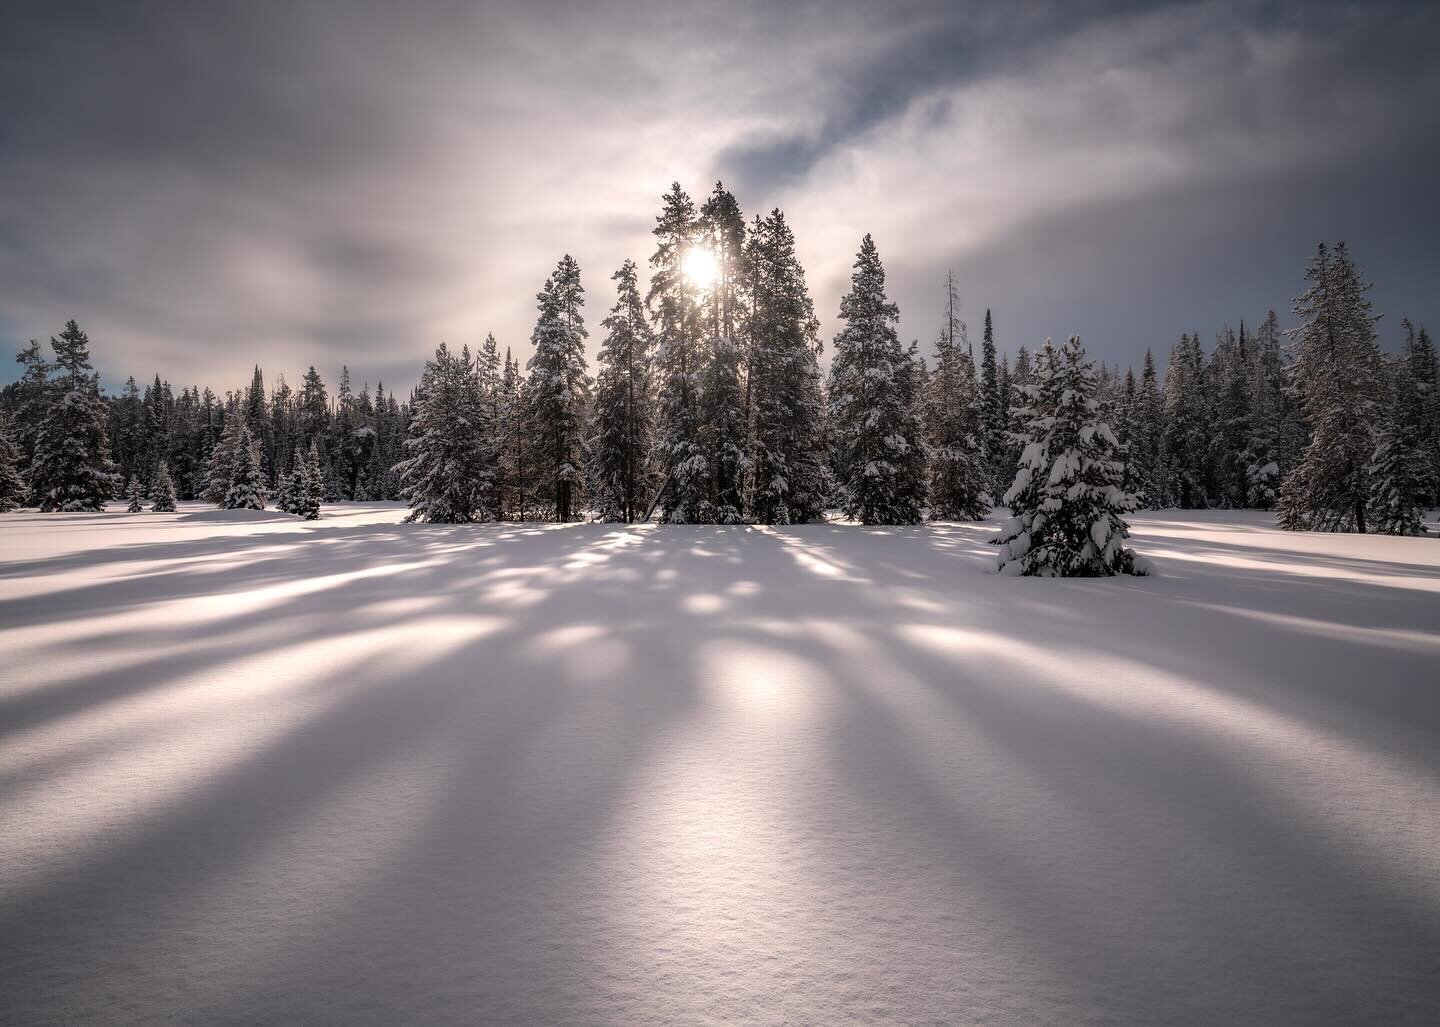 Into the pine meadow&hellip; 

Here&rsquo;s a set from the morning after after about 16 inches of fresh snow had dropped on a couple feet of existing snowfall&hellip; 
.
.
.
.
#landscape_lovers #pineforest #pinetree #forestcaptures #forestlight #wood